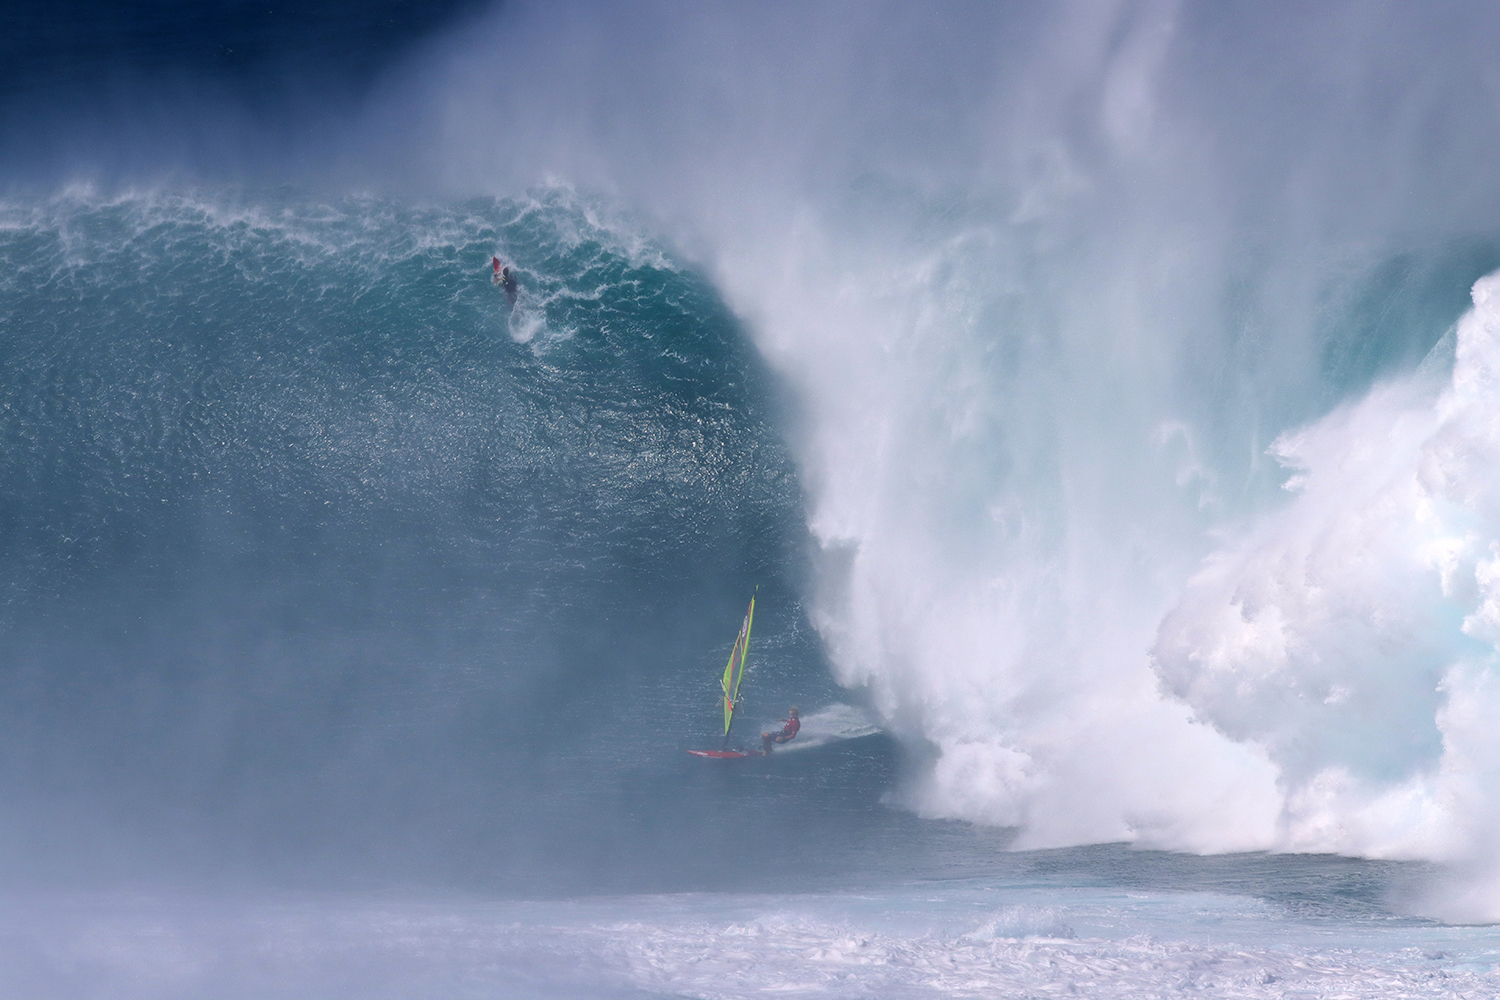 Adam Warchol about to endure one of the biggest wipe outs ever!